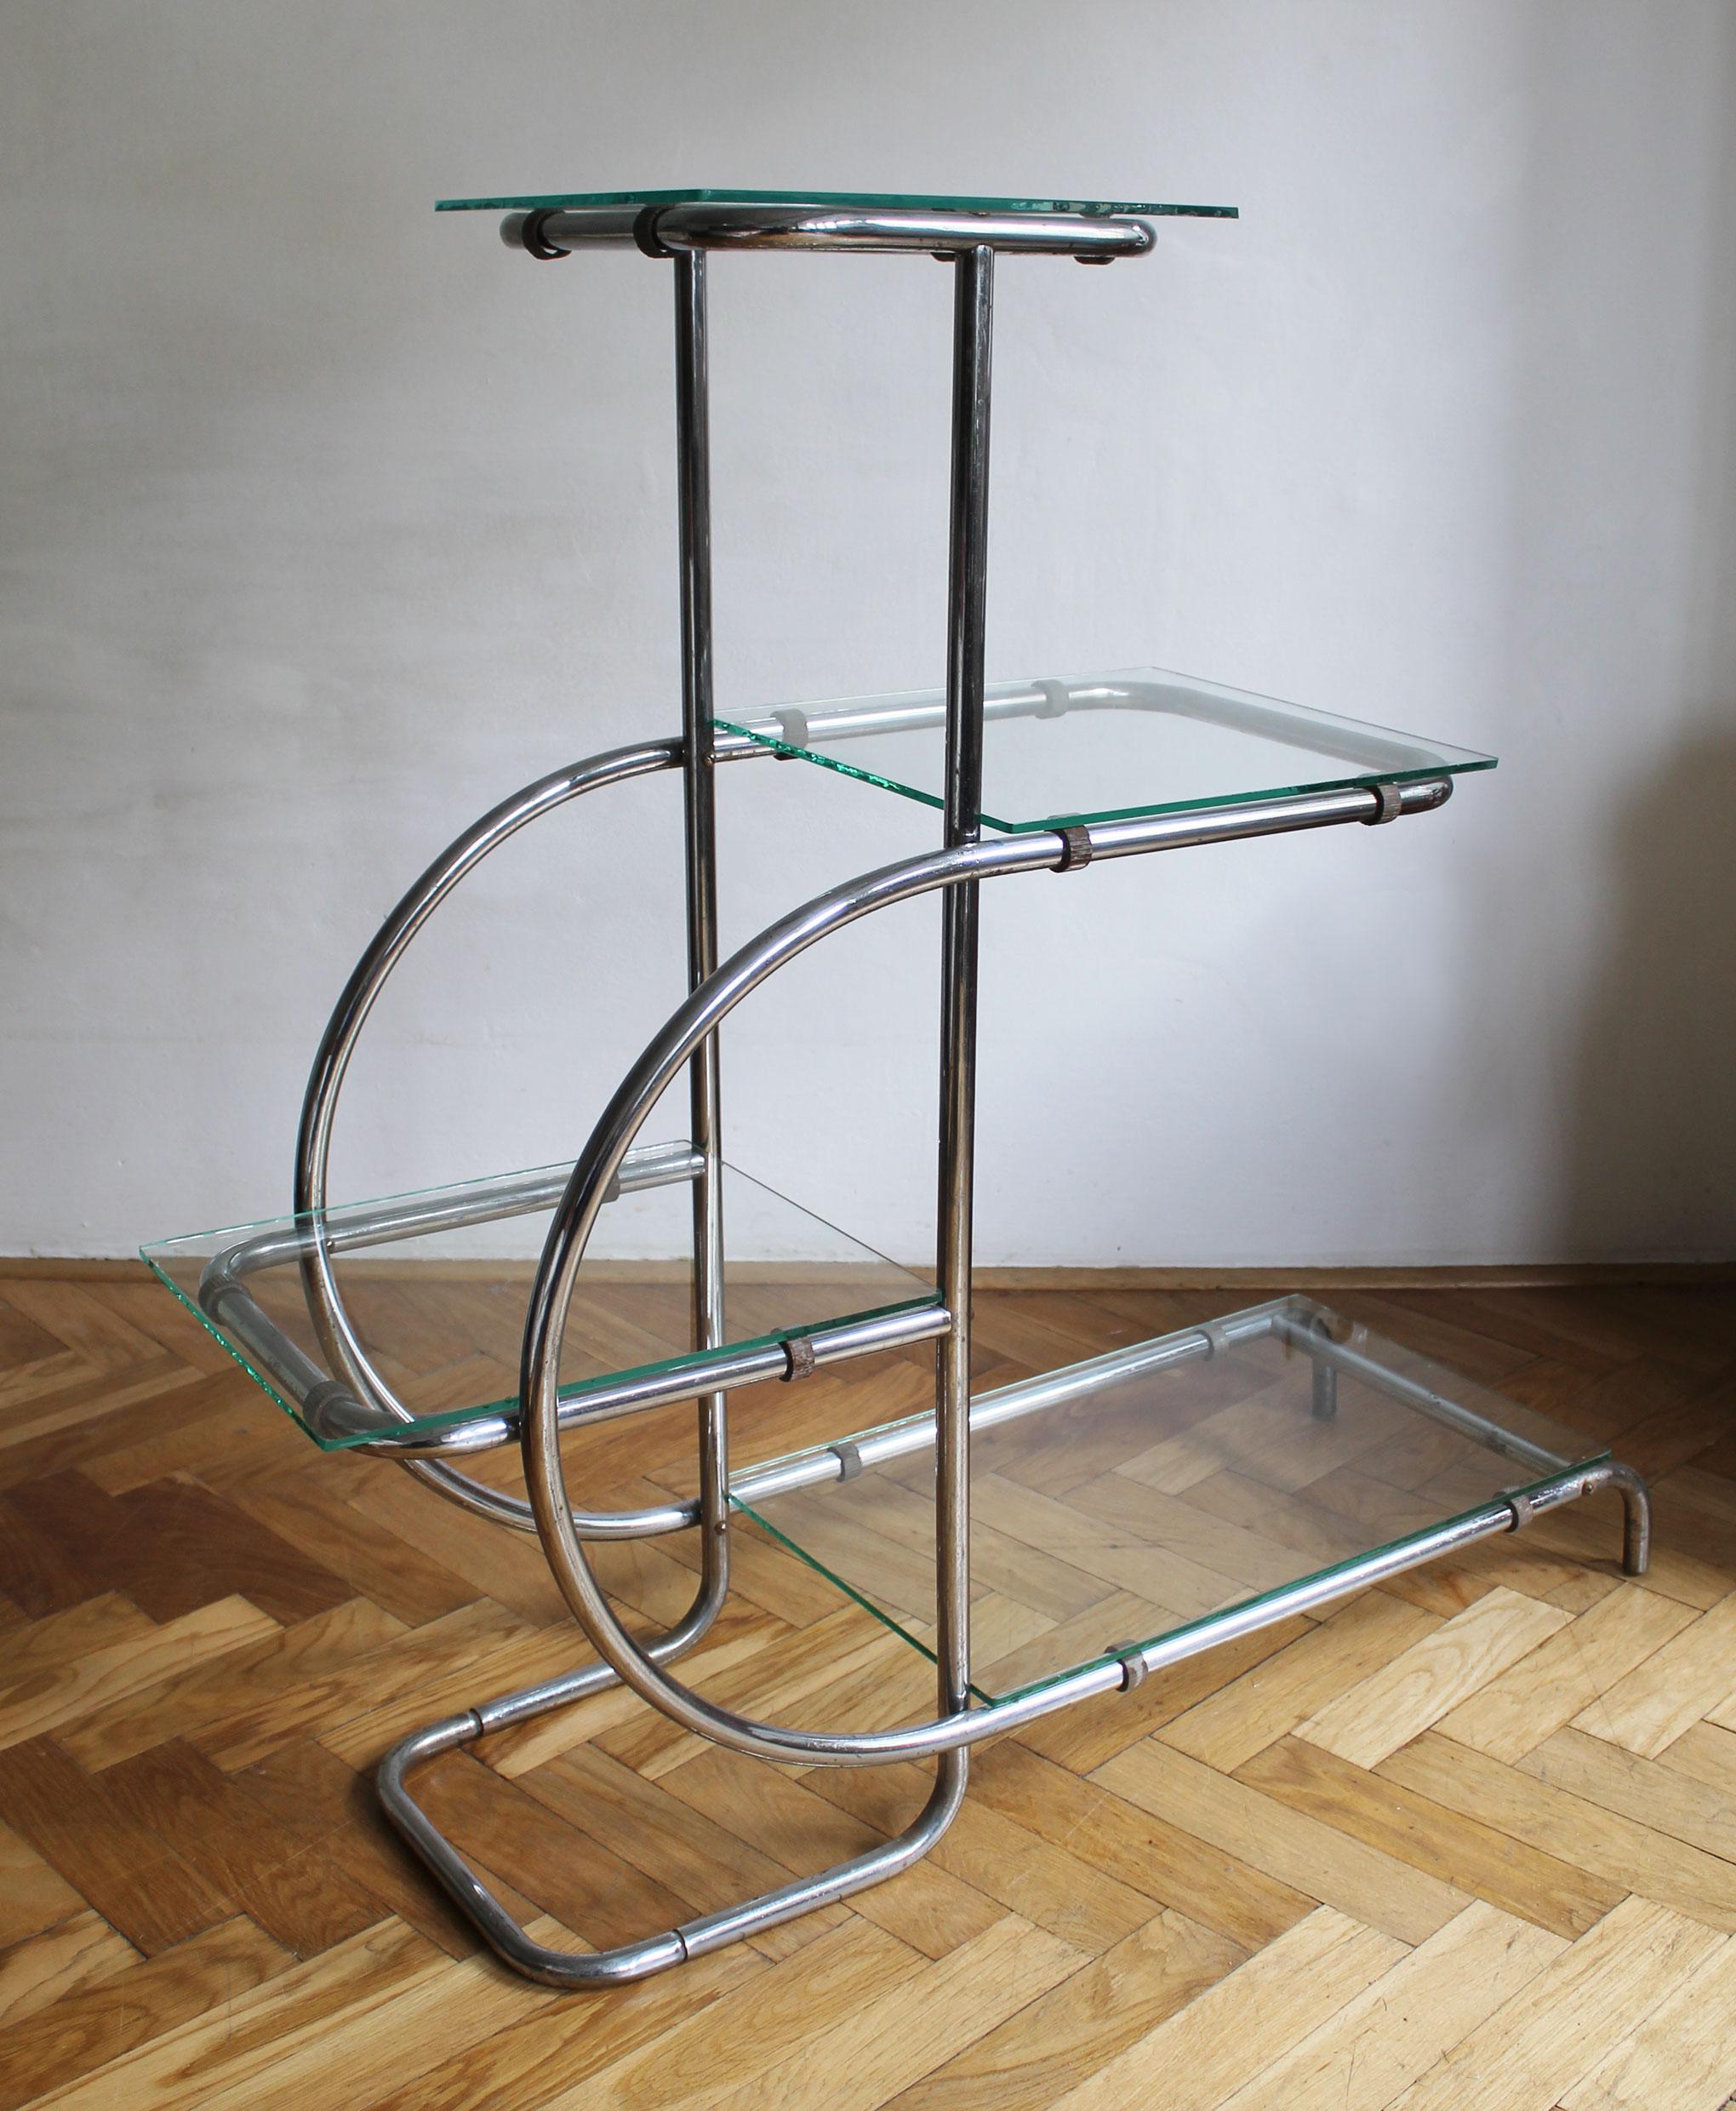 A modernist flower stand made up of four glass shelves of different sizes, positioned at different heights and with a continuous tubular frame.  Designed to display plants and flowers in a beautiful composition.

This piece is a prime example of the